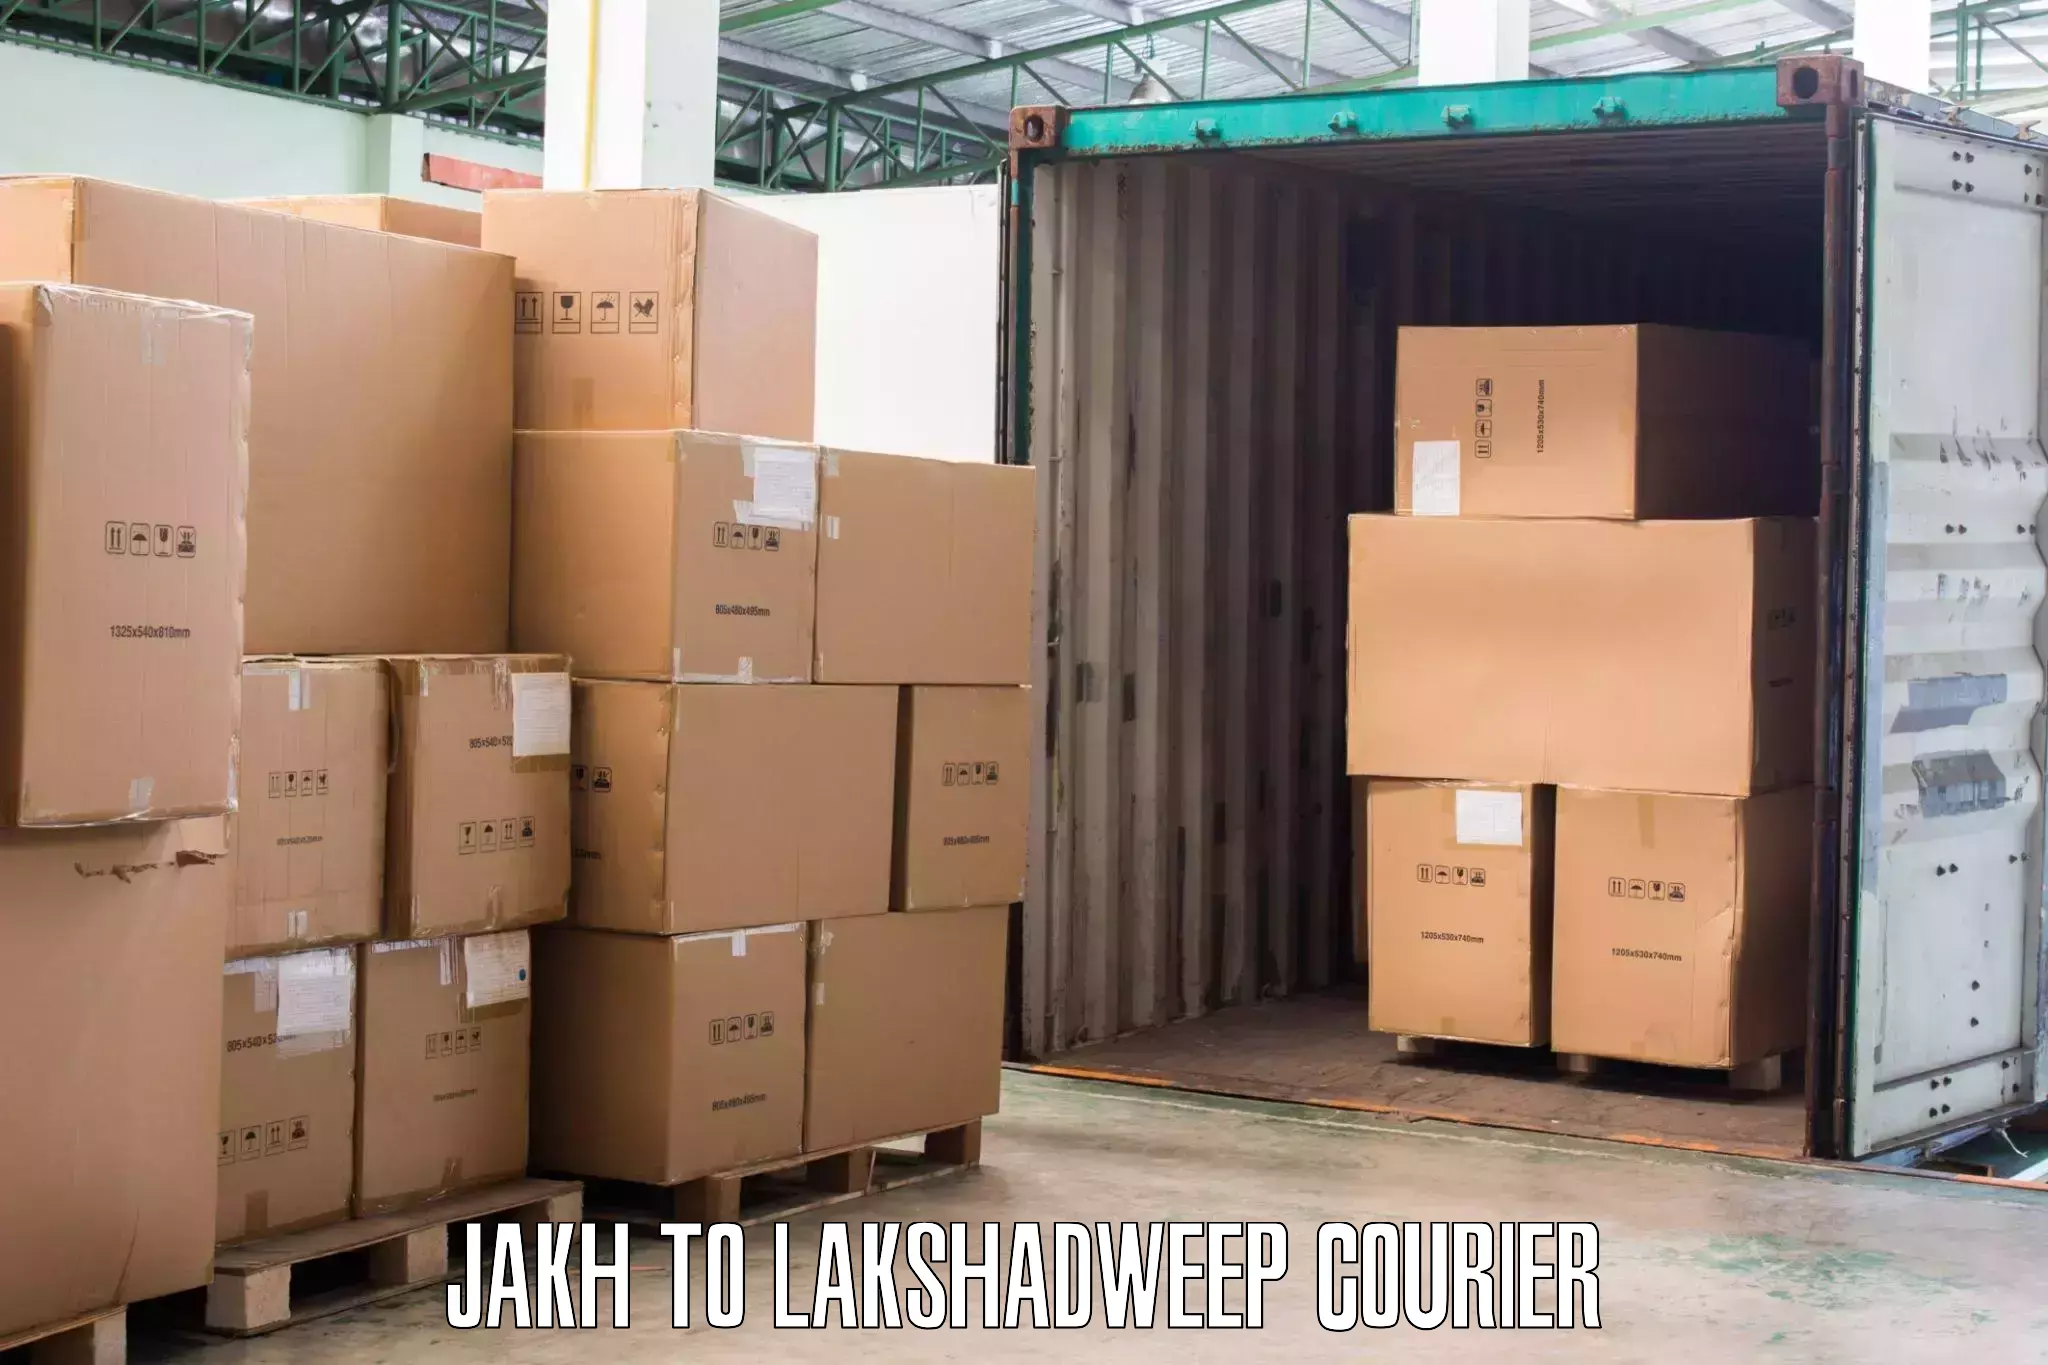 Hassle-free relocation in Jakh to Lakshadweep